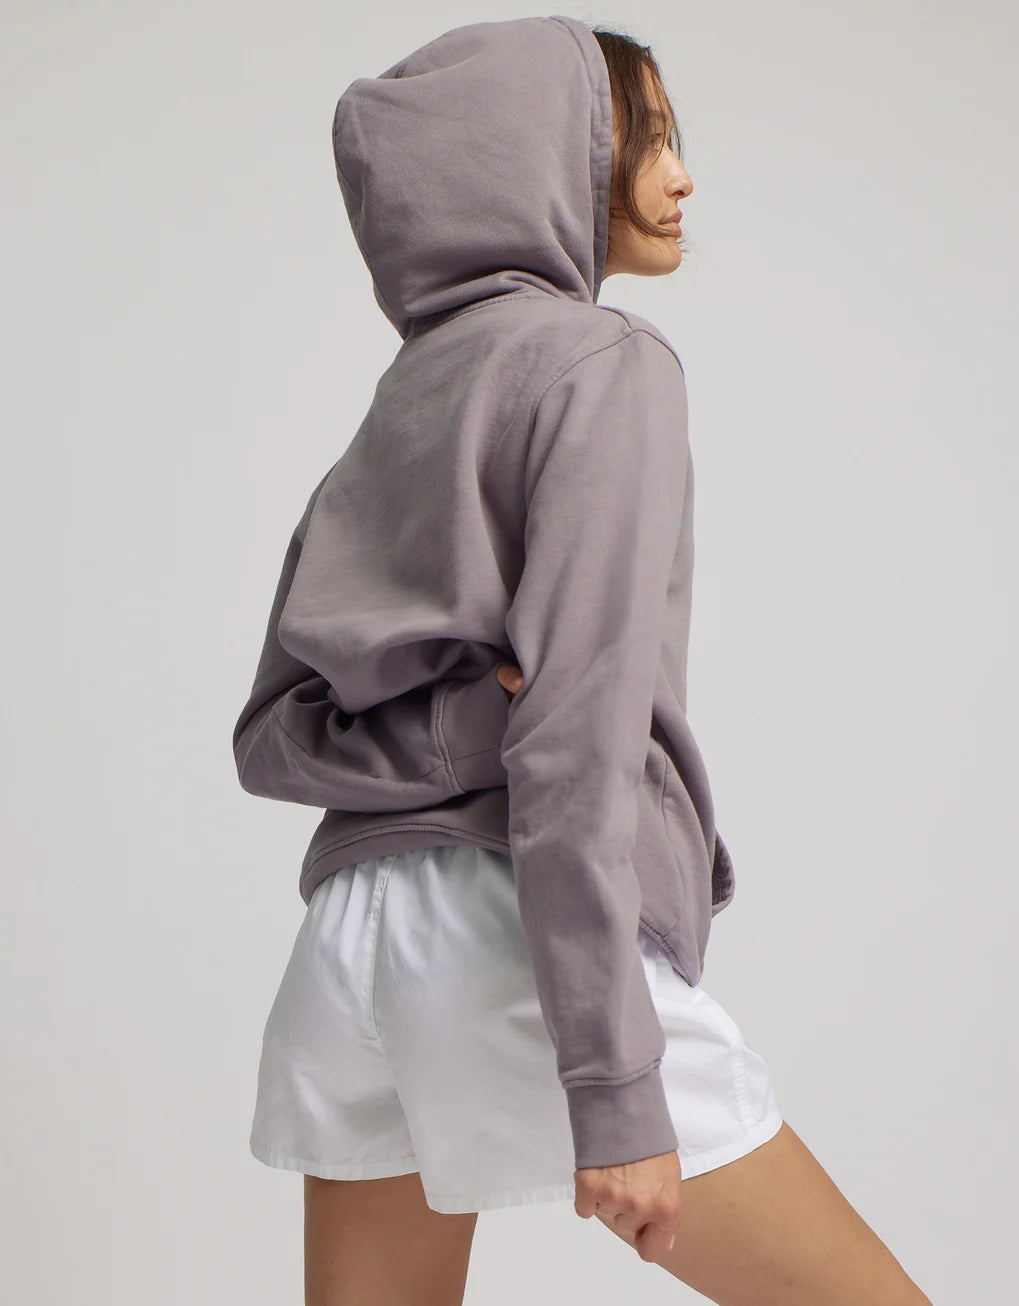 A young woman in a gray hoodie and Colorful Standard organic twill shorts is shown in profile against a neutral background.